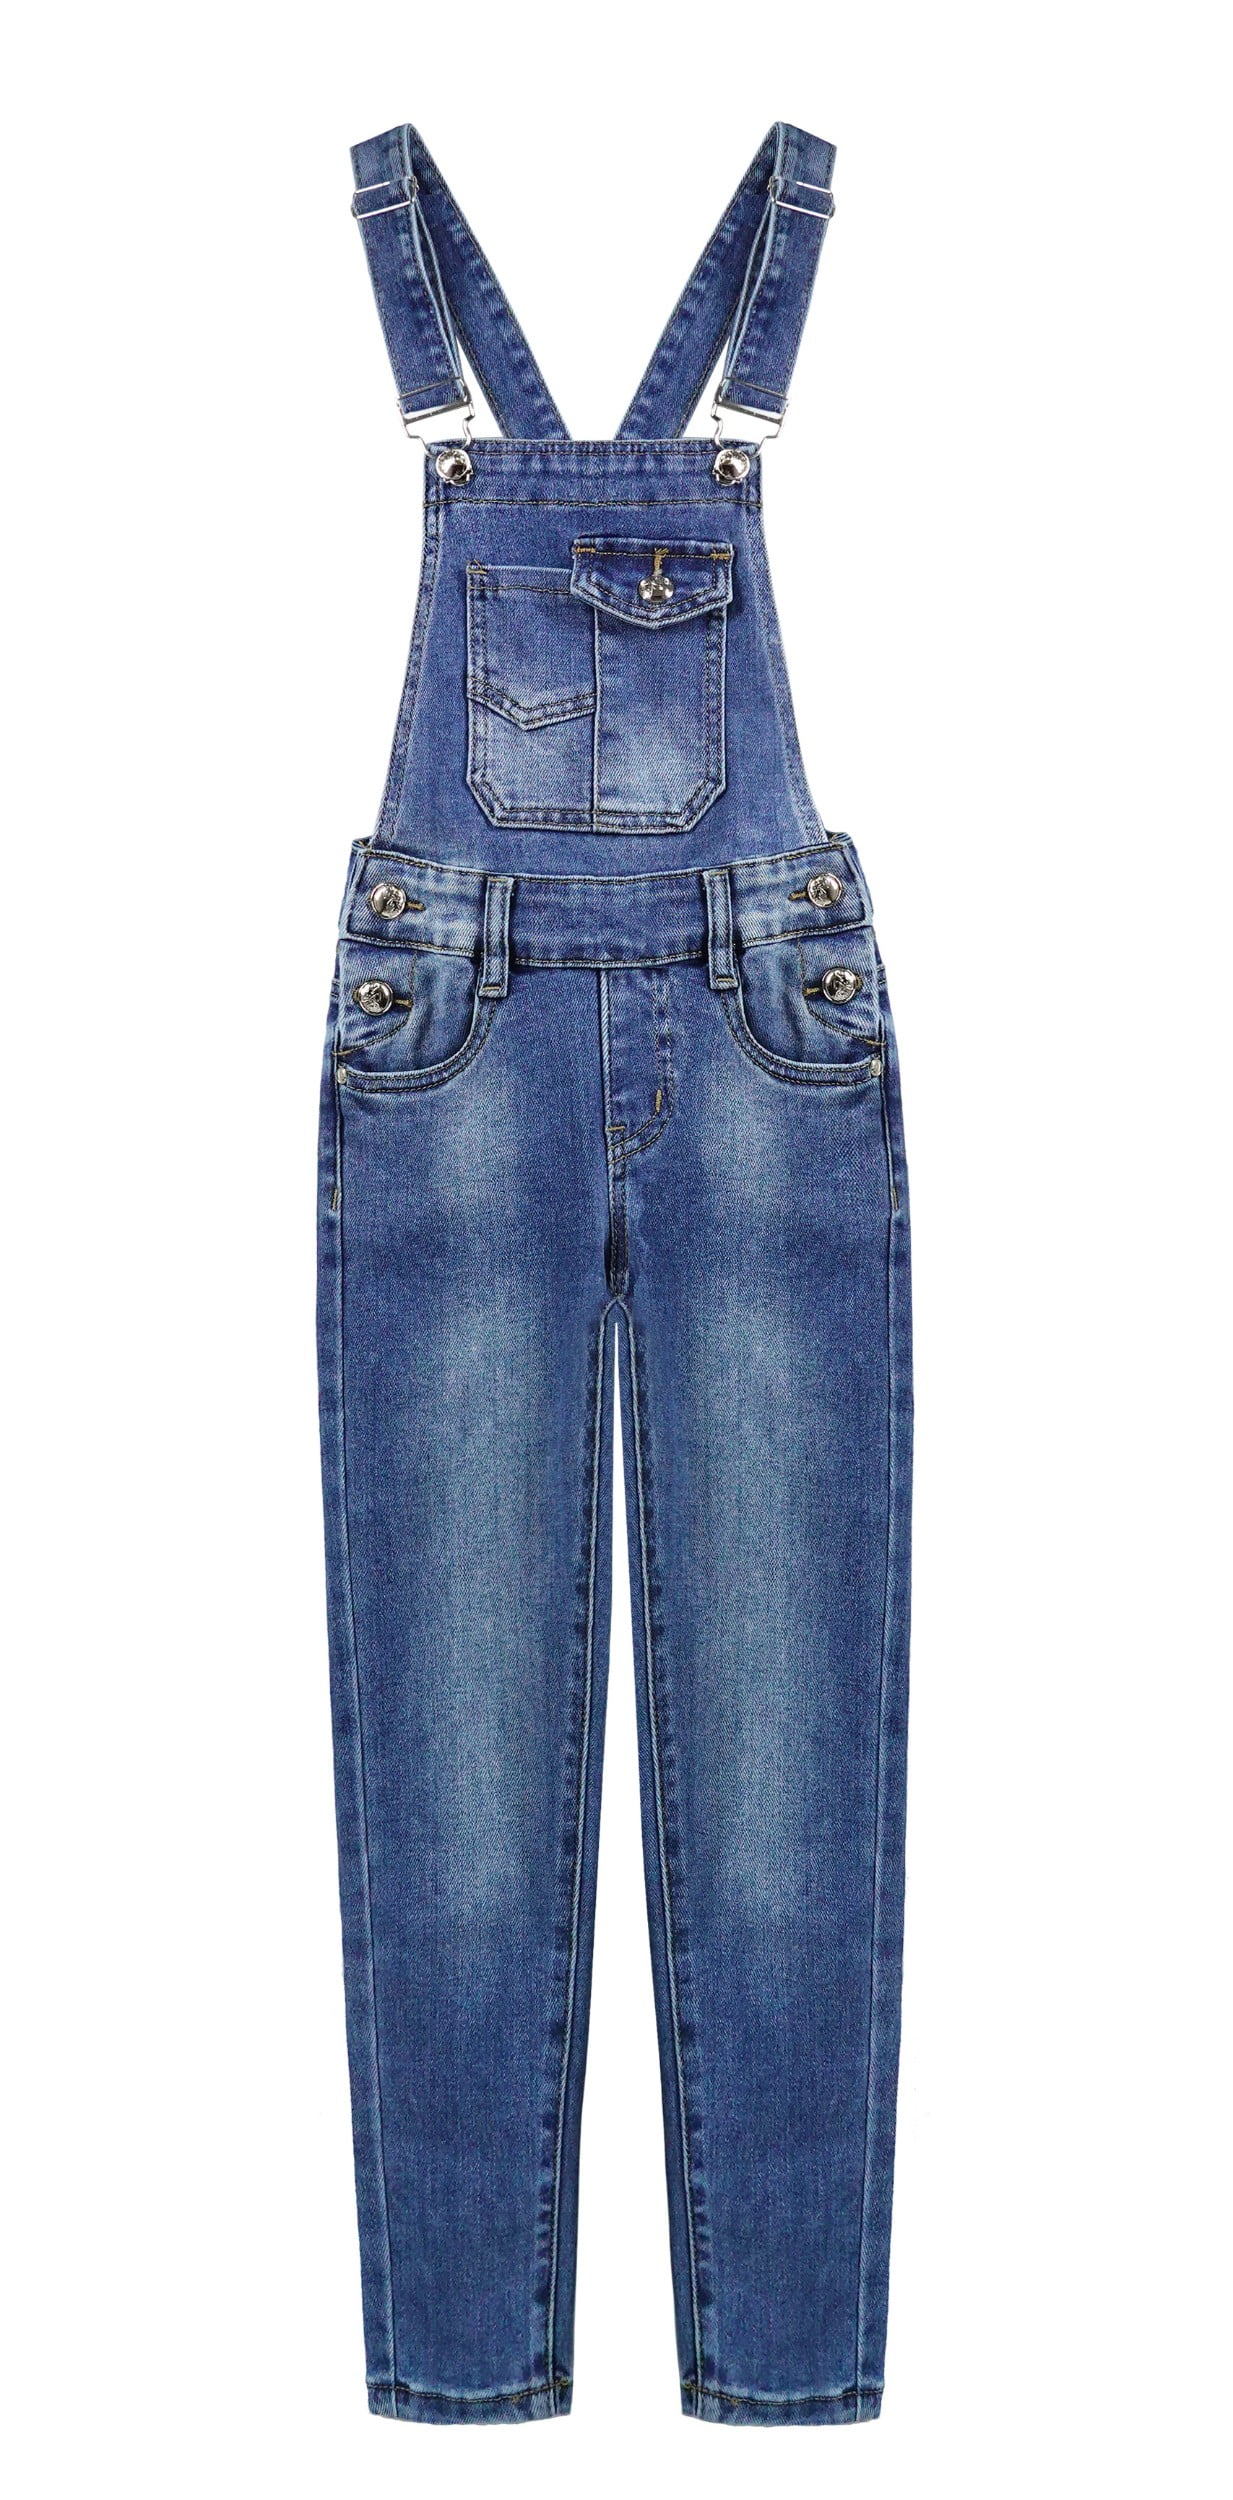 KIDSCOOL SPACE Boy Girl Overall, Large Pockets Soft Washed denim ...